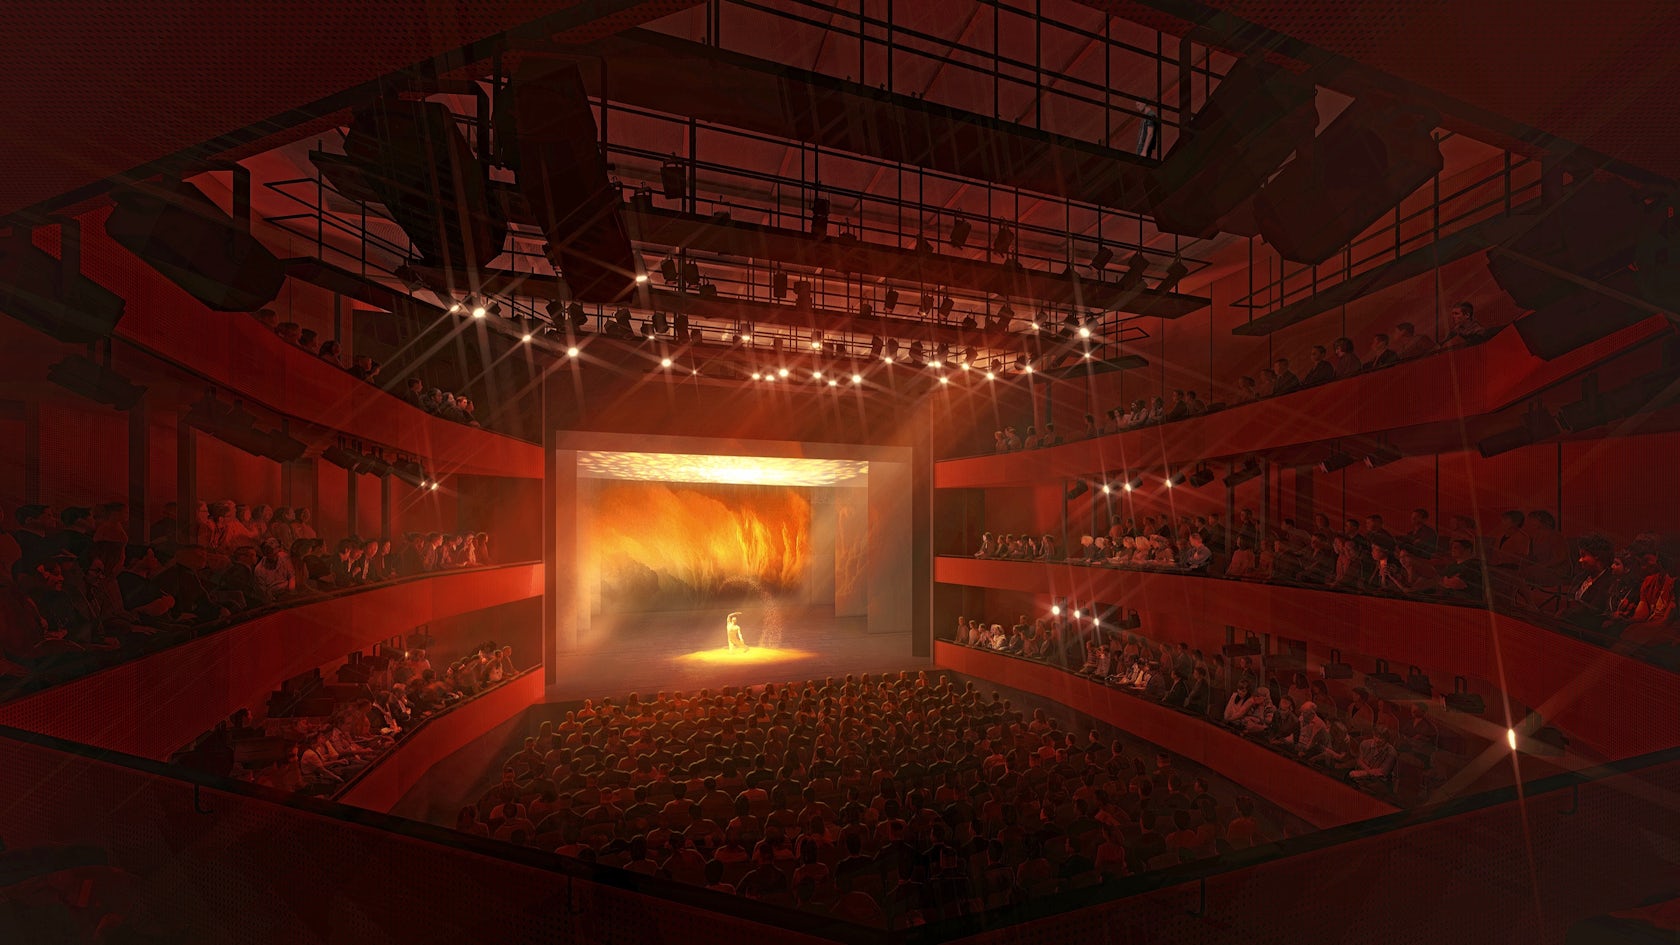 The Making of the Perelman Performing Arts Center